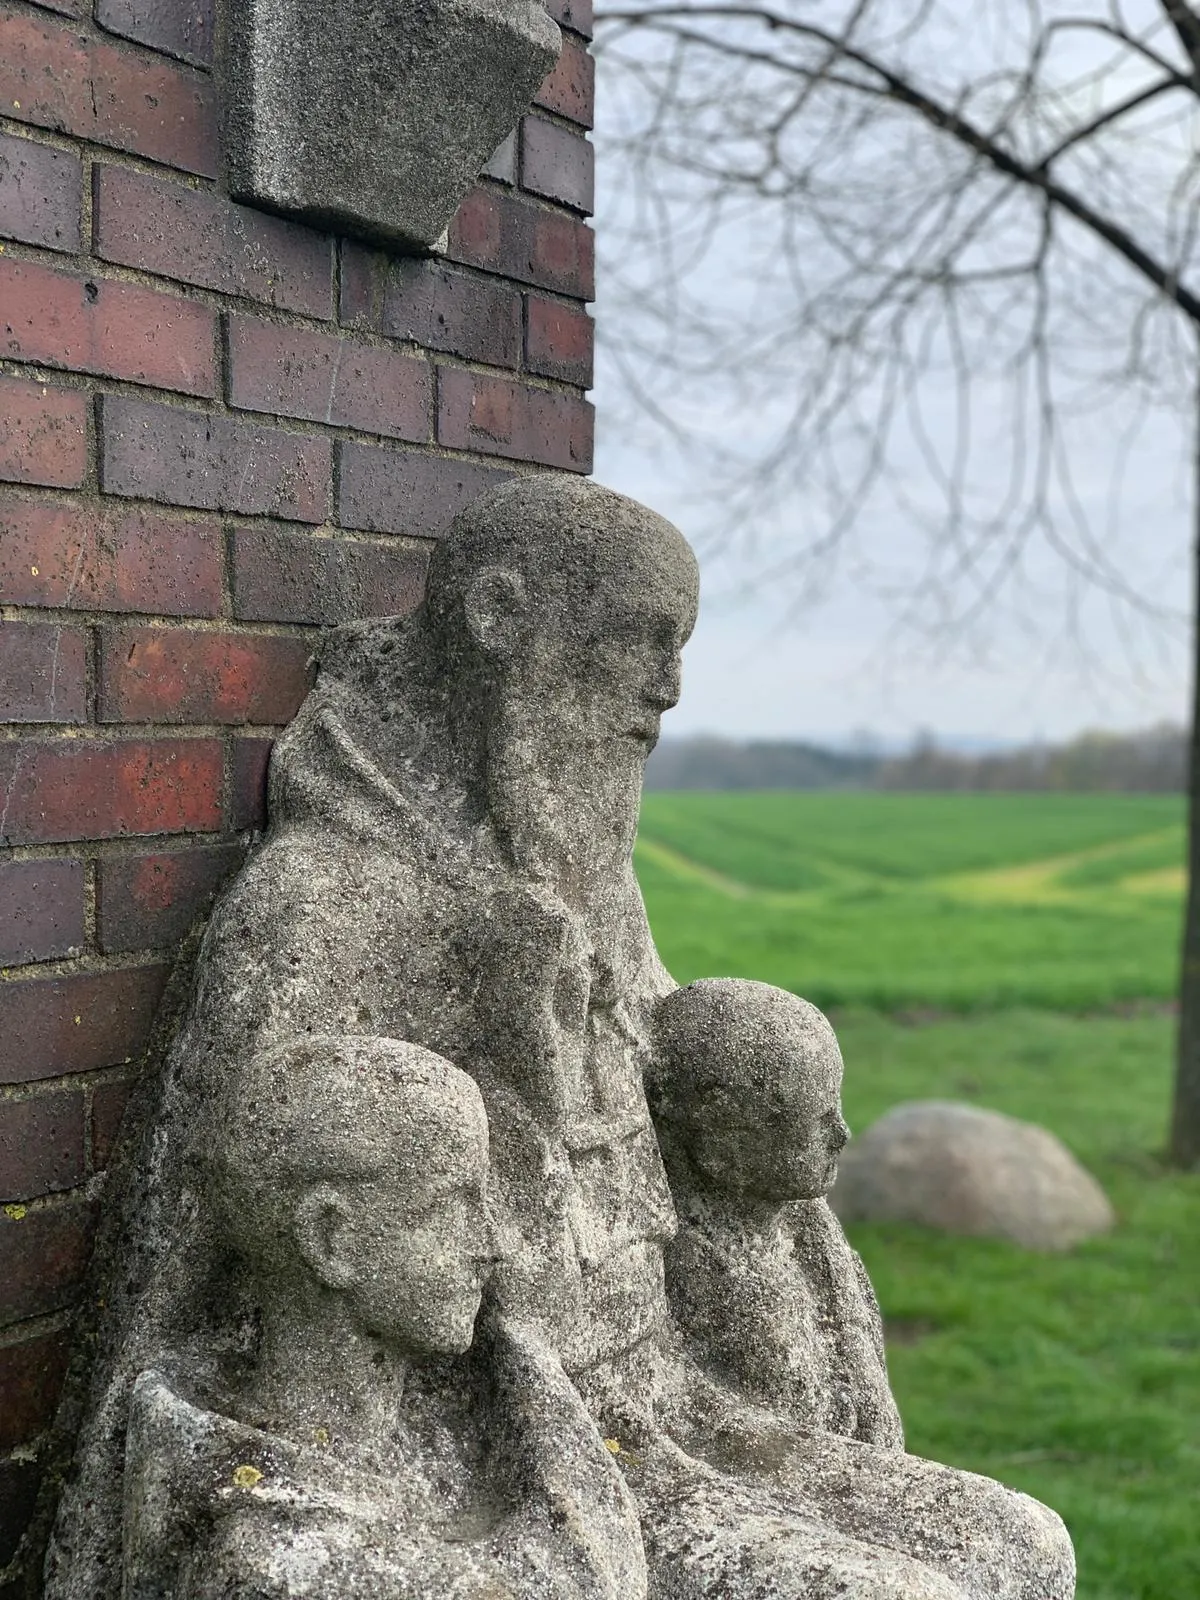 Photo showing: Ludgerirast, highest point of Coesfeld mountains, where Ludgerus, as the legend tells, gave a last blessing to the diocese of Mimigernaford (Münster) the day before his death, March 26. 809. Monument by Dominikus Zwernemann OSB (1901–1983 from monastery Gerleve), dated 1934